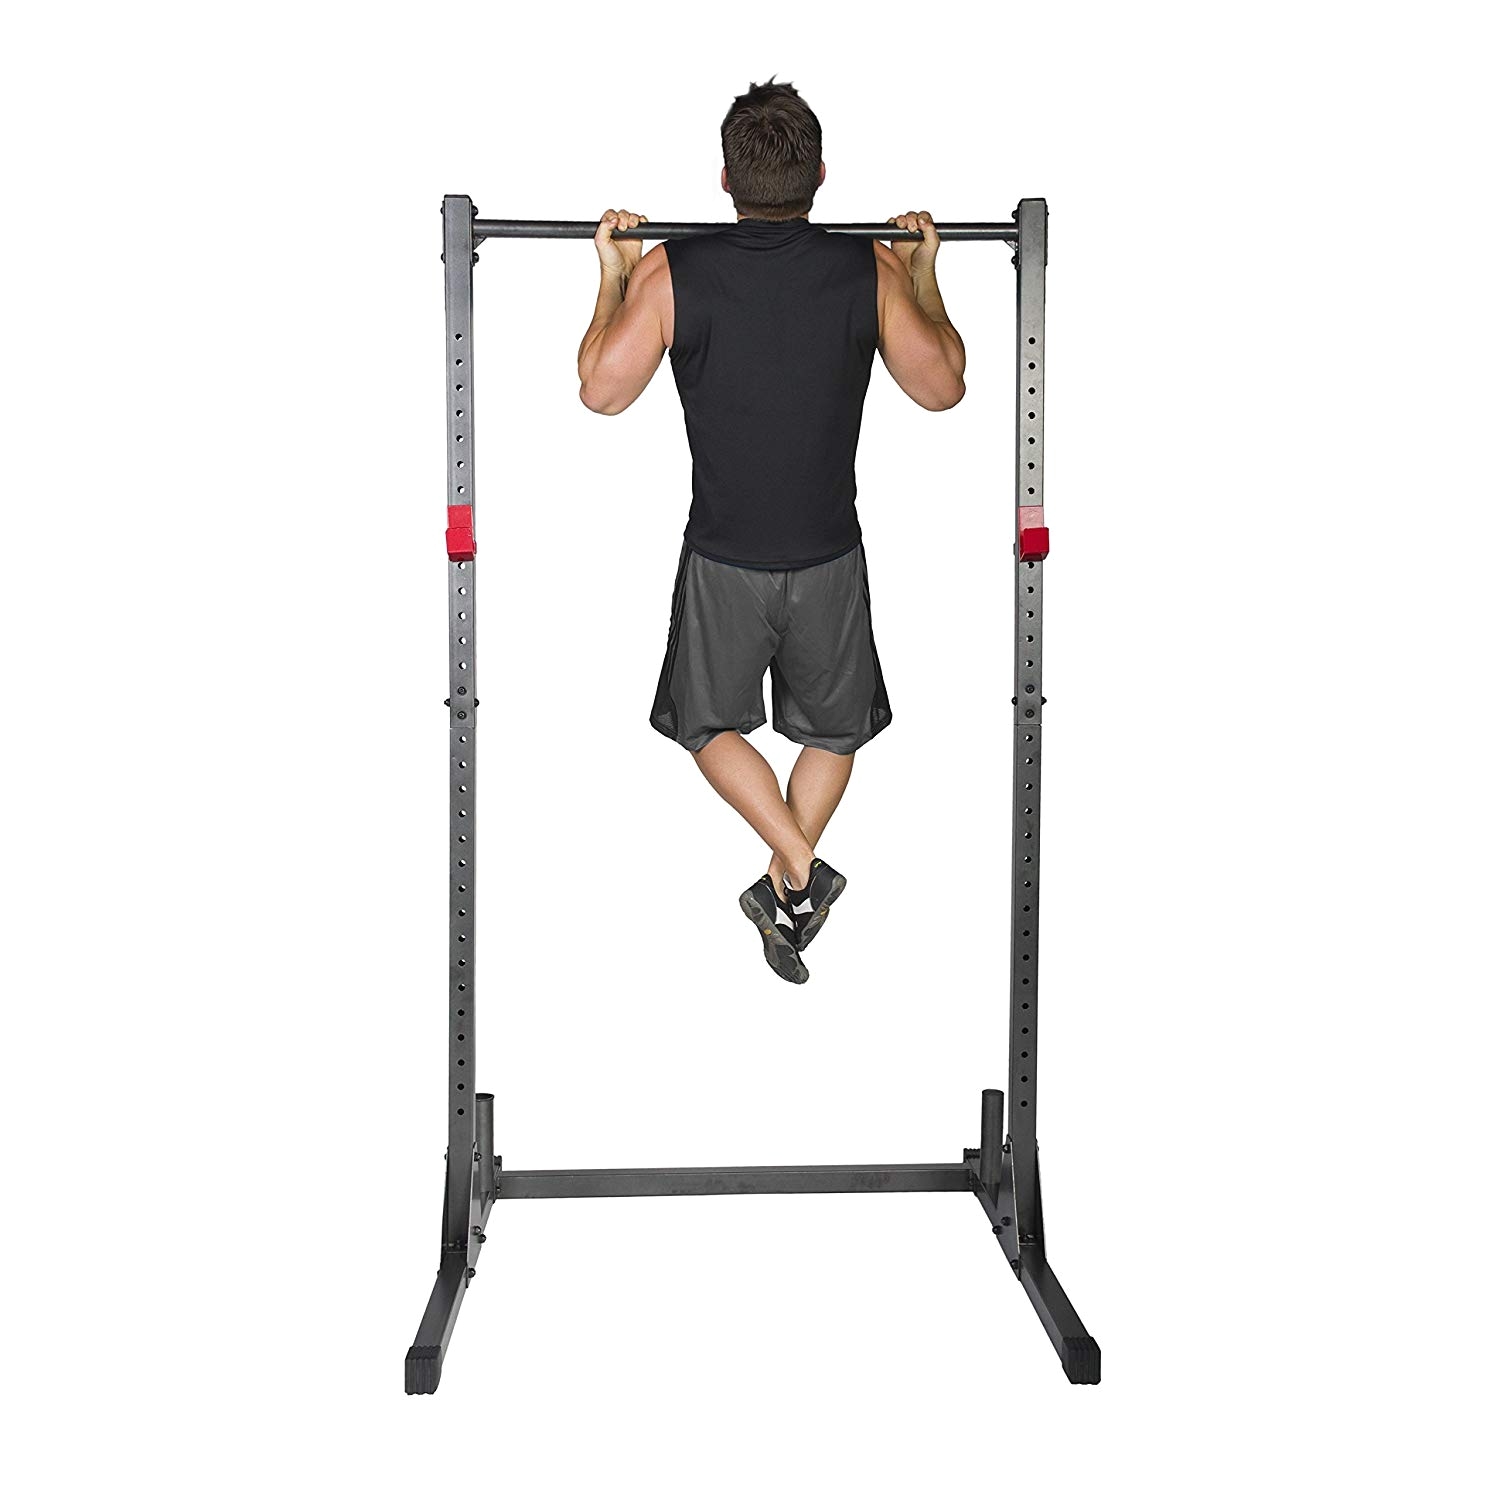 cap barbell power rack exercise stand